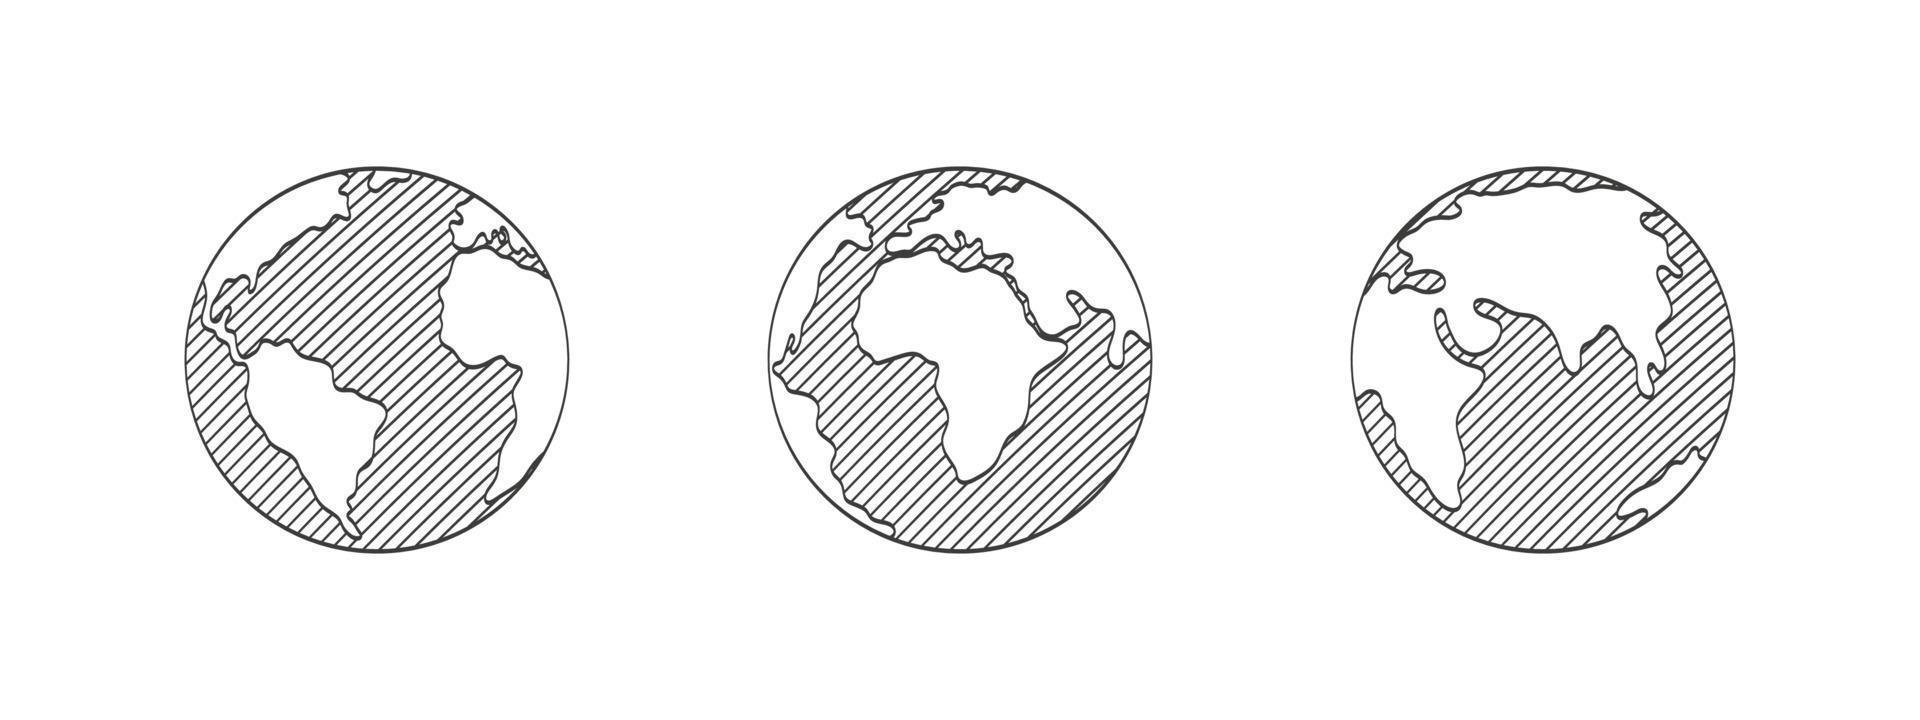 Planet Earth. Earth globes sketch. Earth Globes icons. Vector illustration